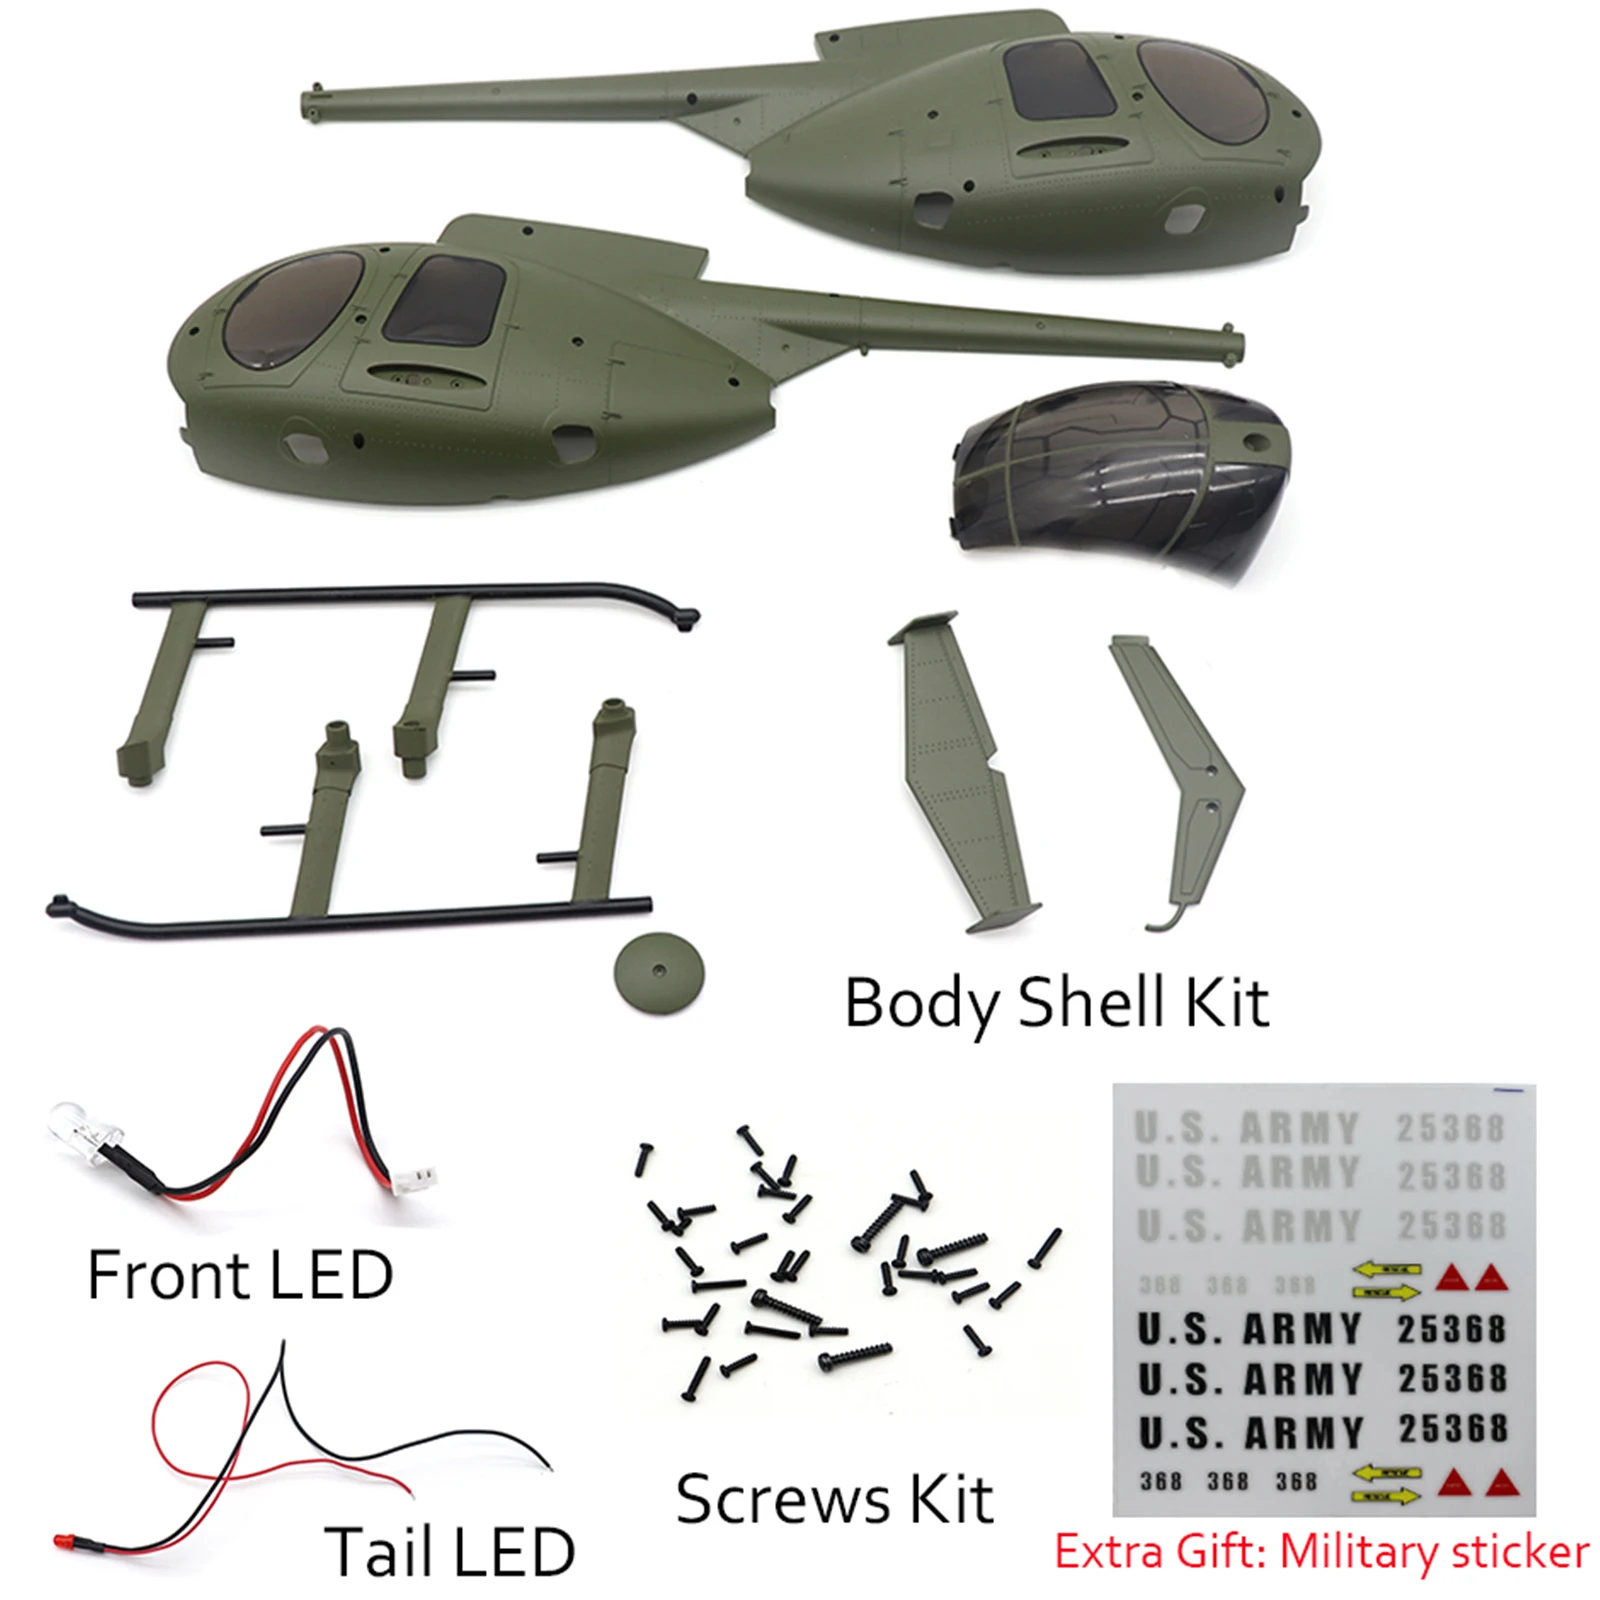 RC ERA for C189 Bird MD500 1:28 Scaled Helicopter Body Kit Green - $42.77